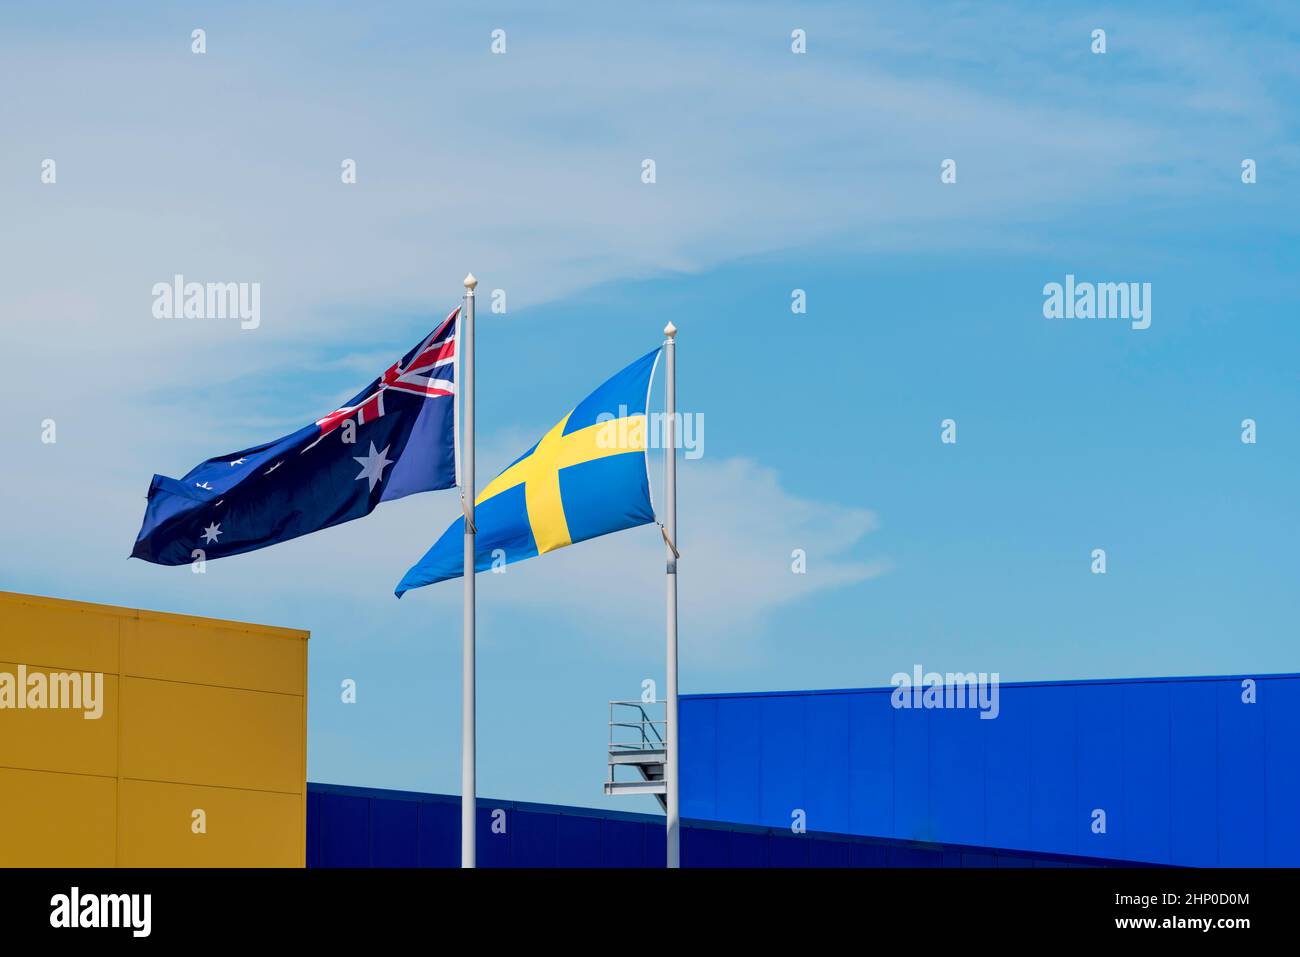 The Swedish and Australian national flags fly above an IKEA store at Marden Park, Sydney, New South Wales, Australia Stock Photo